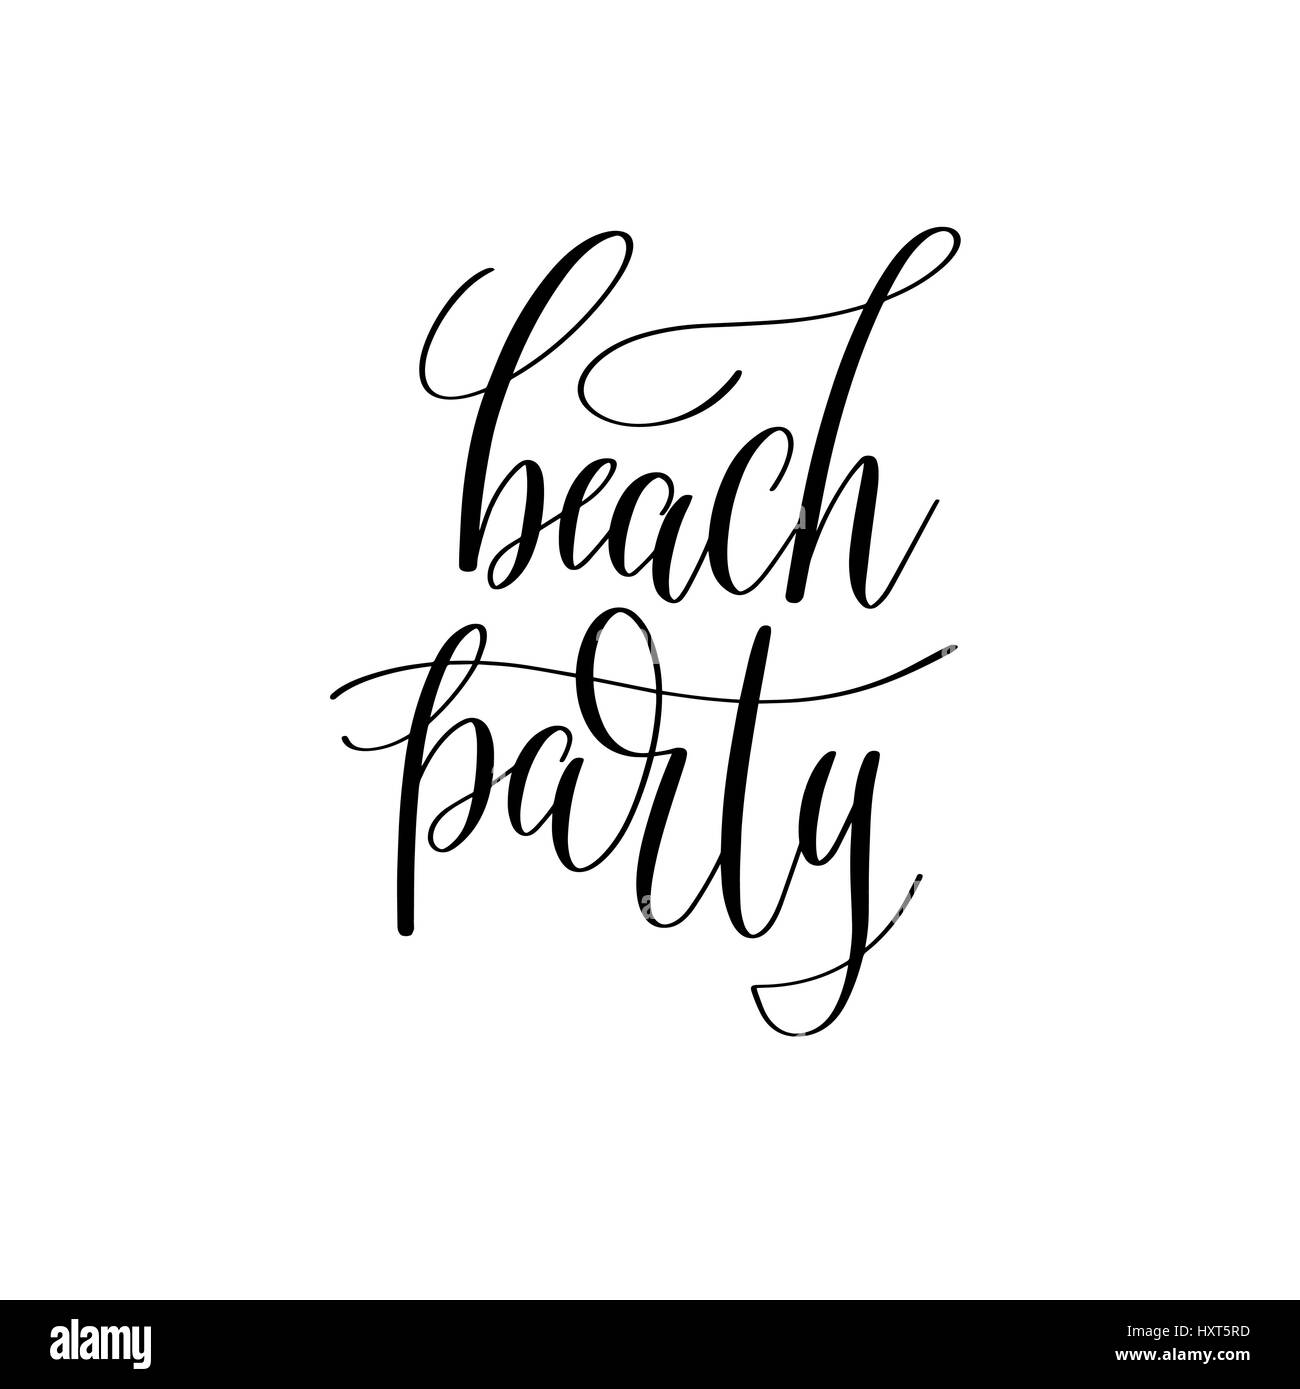 Beach party Black and White Stock Photos & Images - Alamy